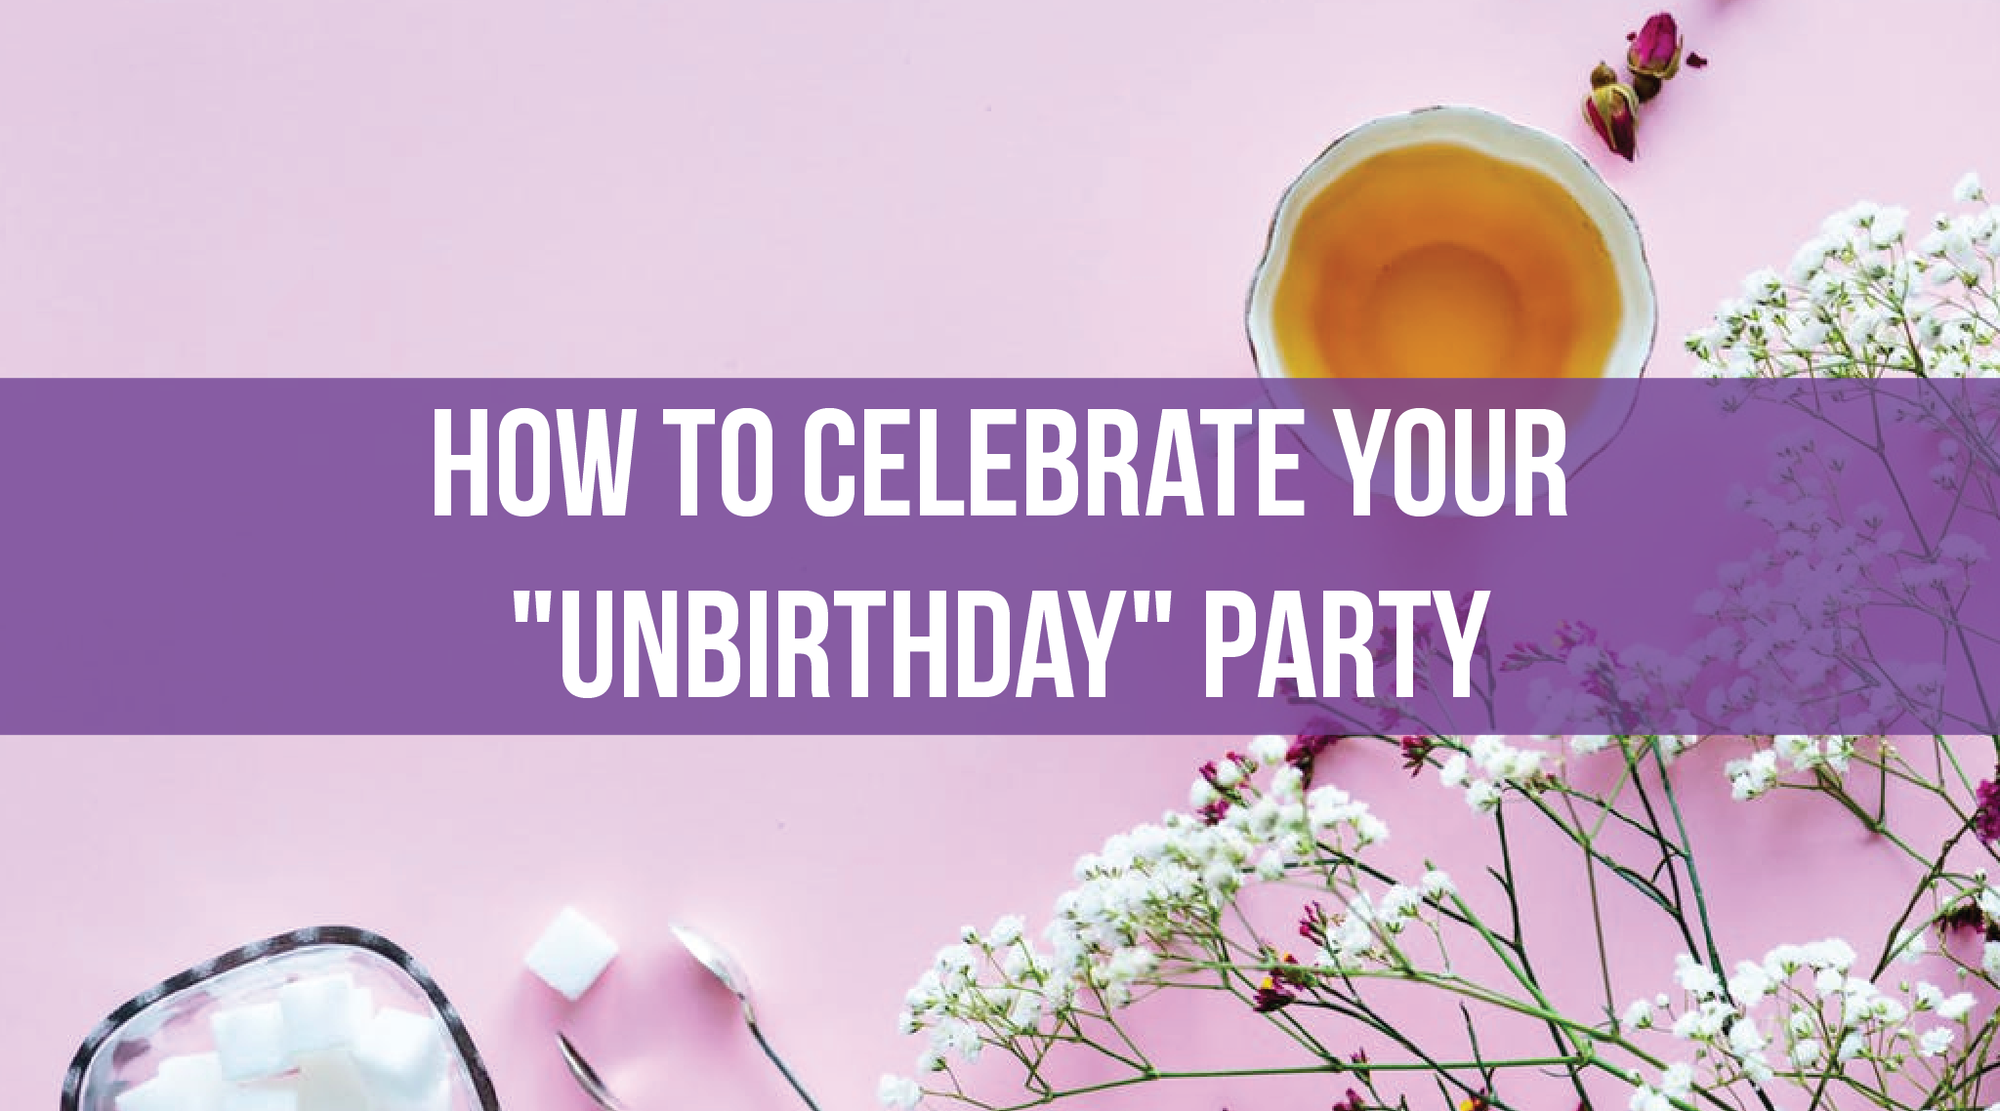 How to Celebrate Your "Unbirthday" Party